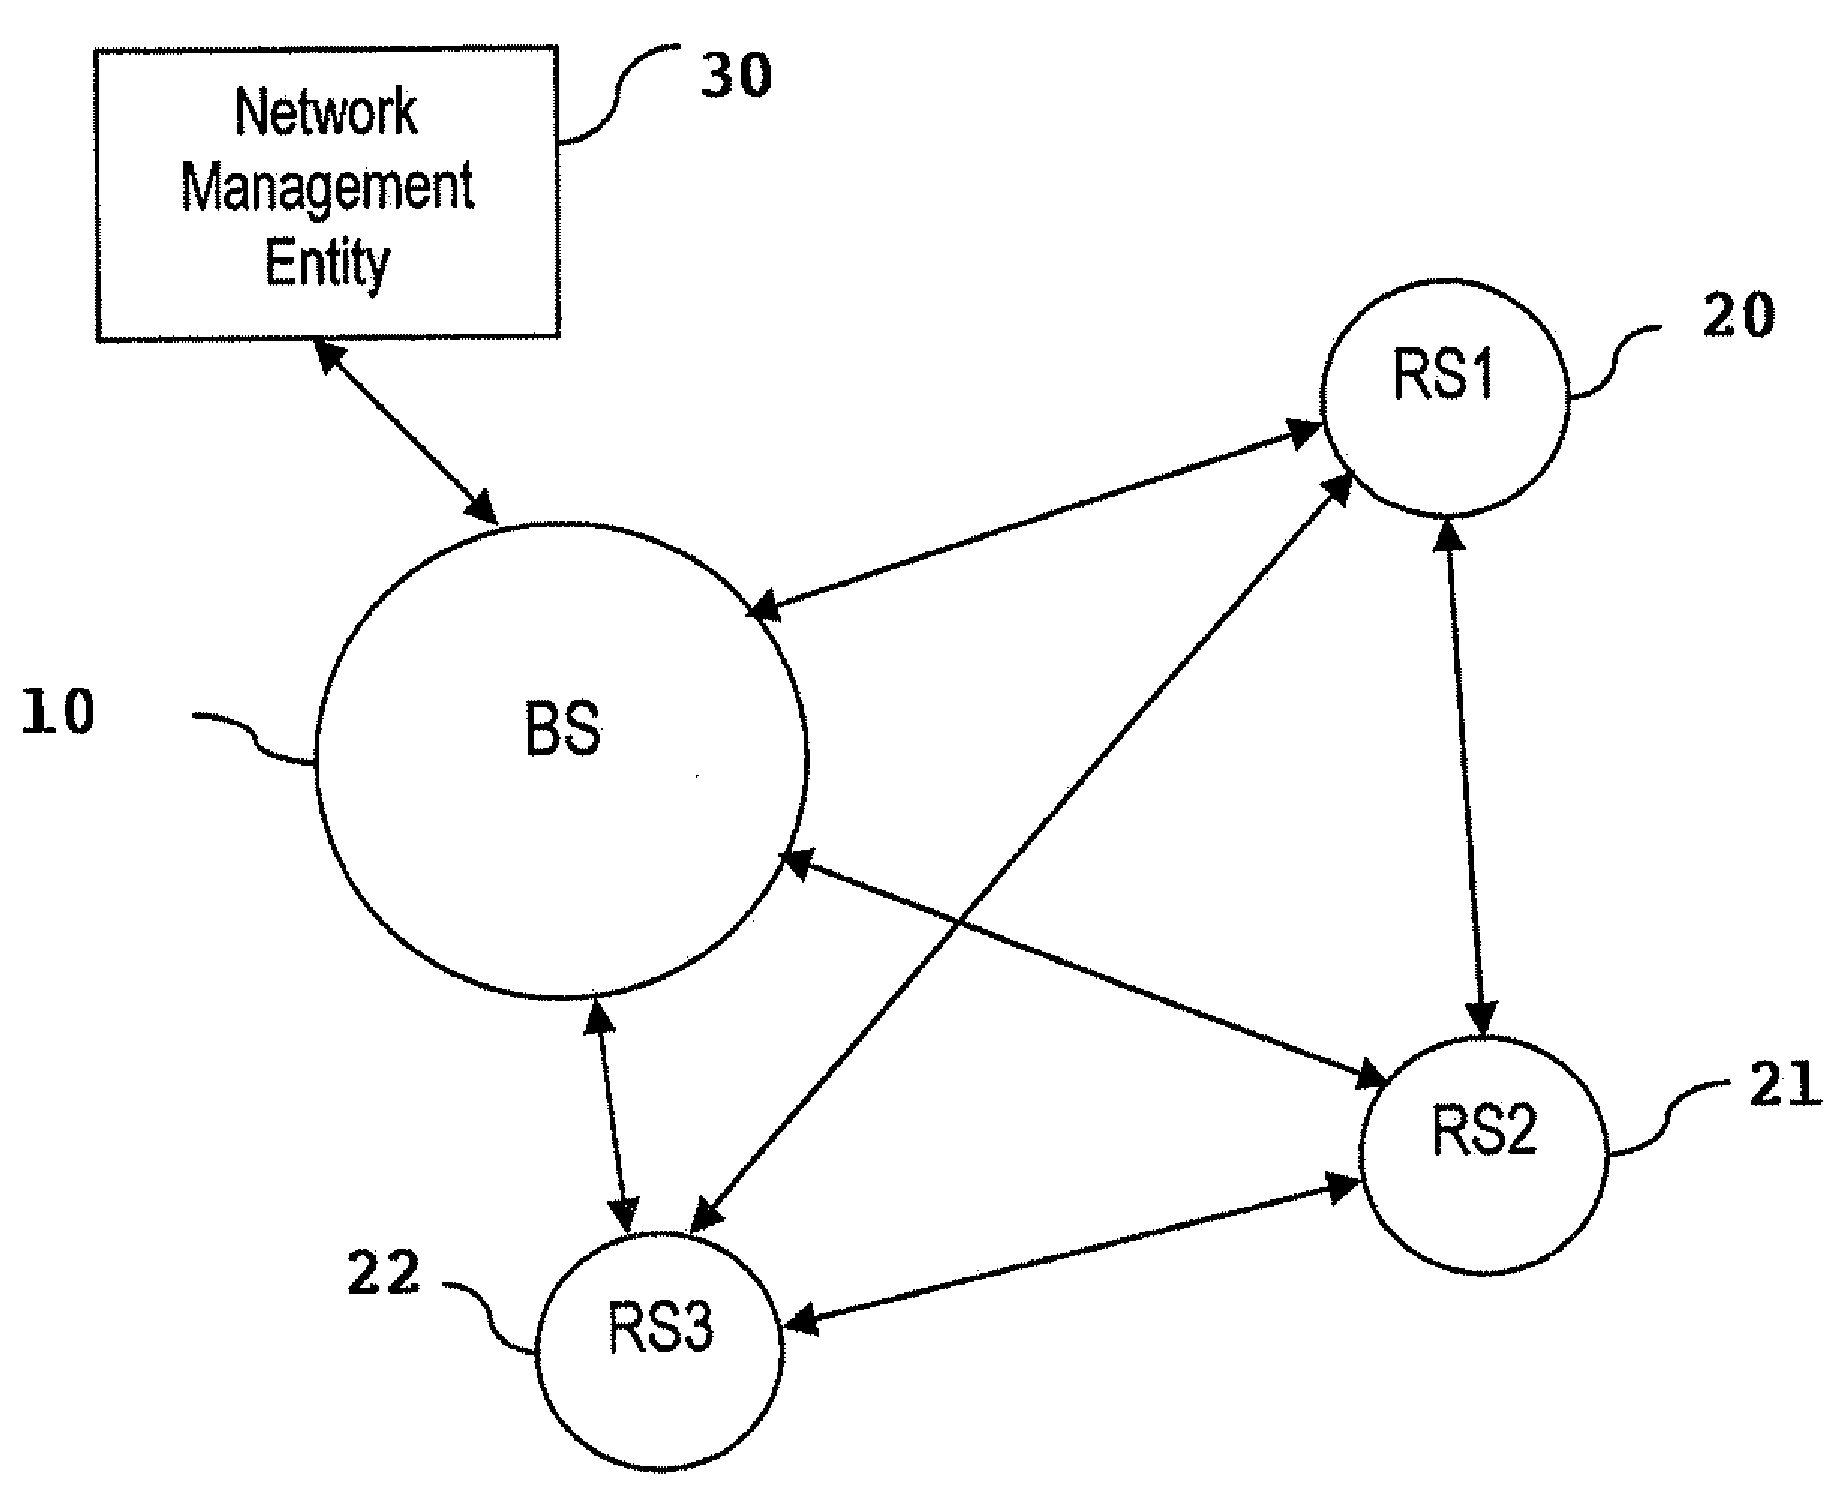 Reuse pattern network scheduling using load levels